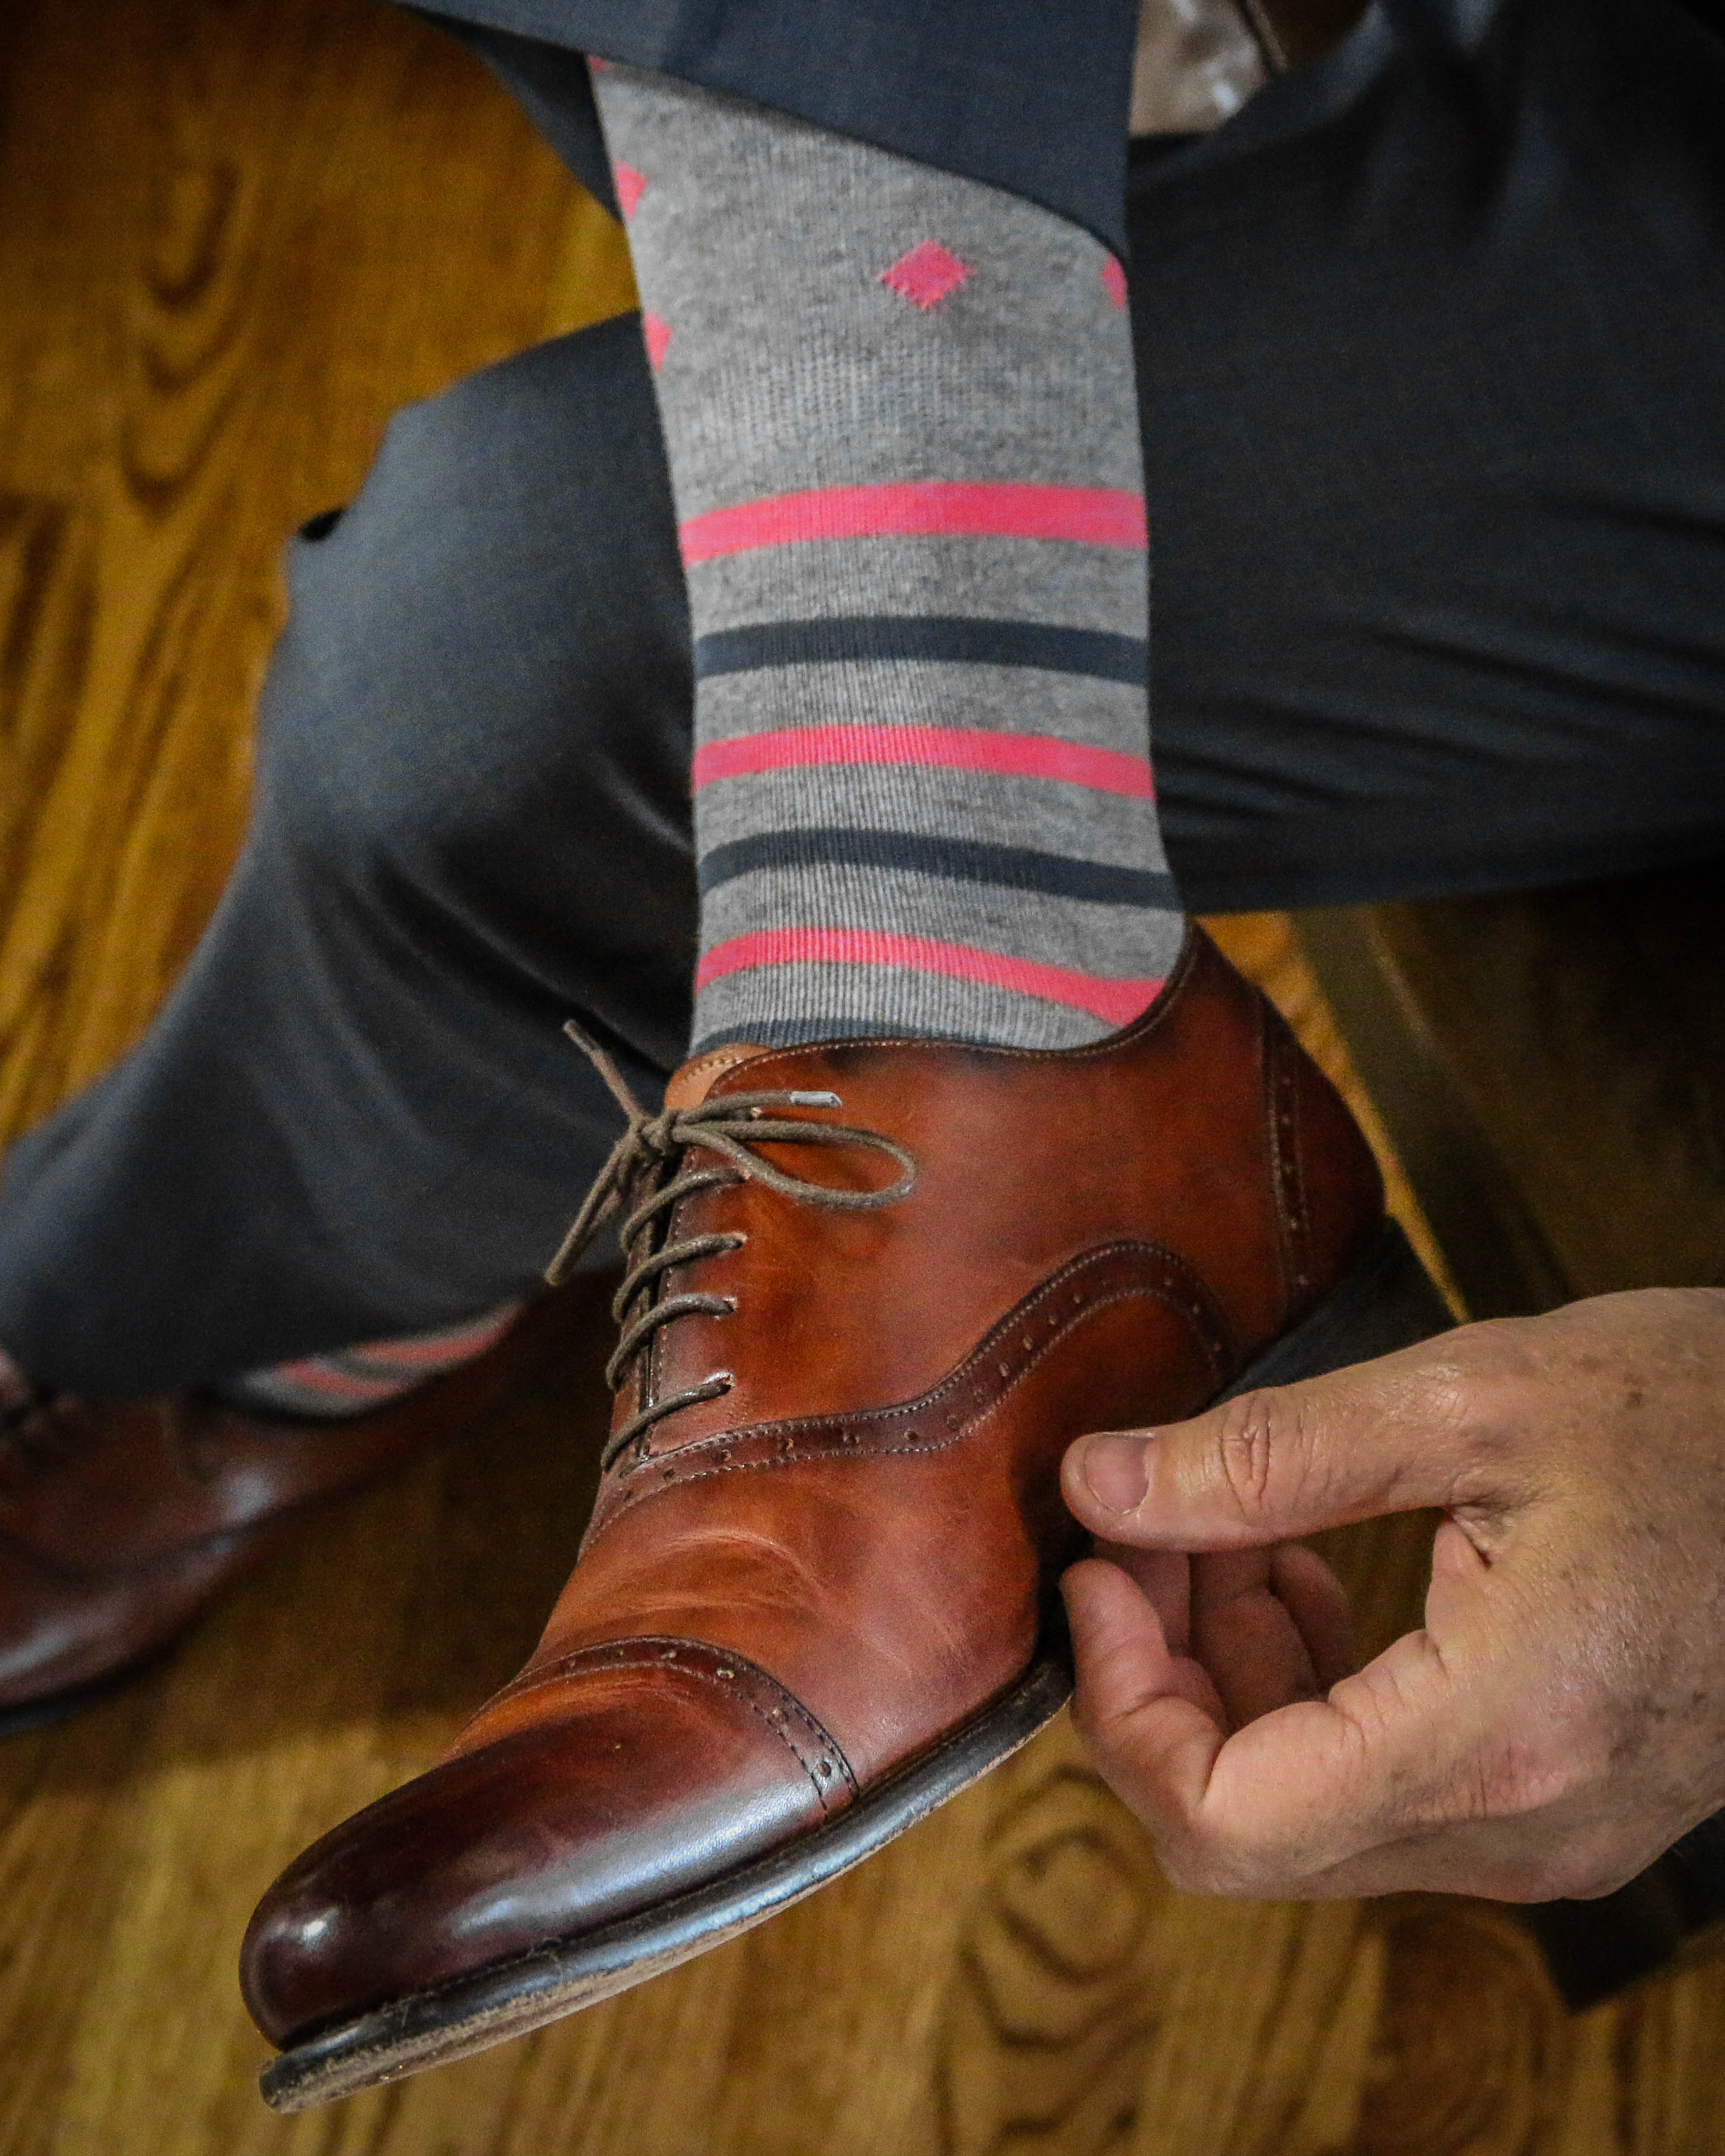 light grey over the calf dress socks with grey and pink stripes and pink diamond prints, brown dress shoes, grey dress pants